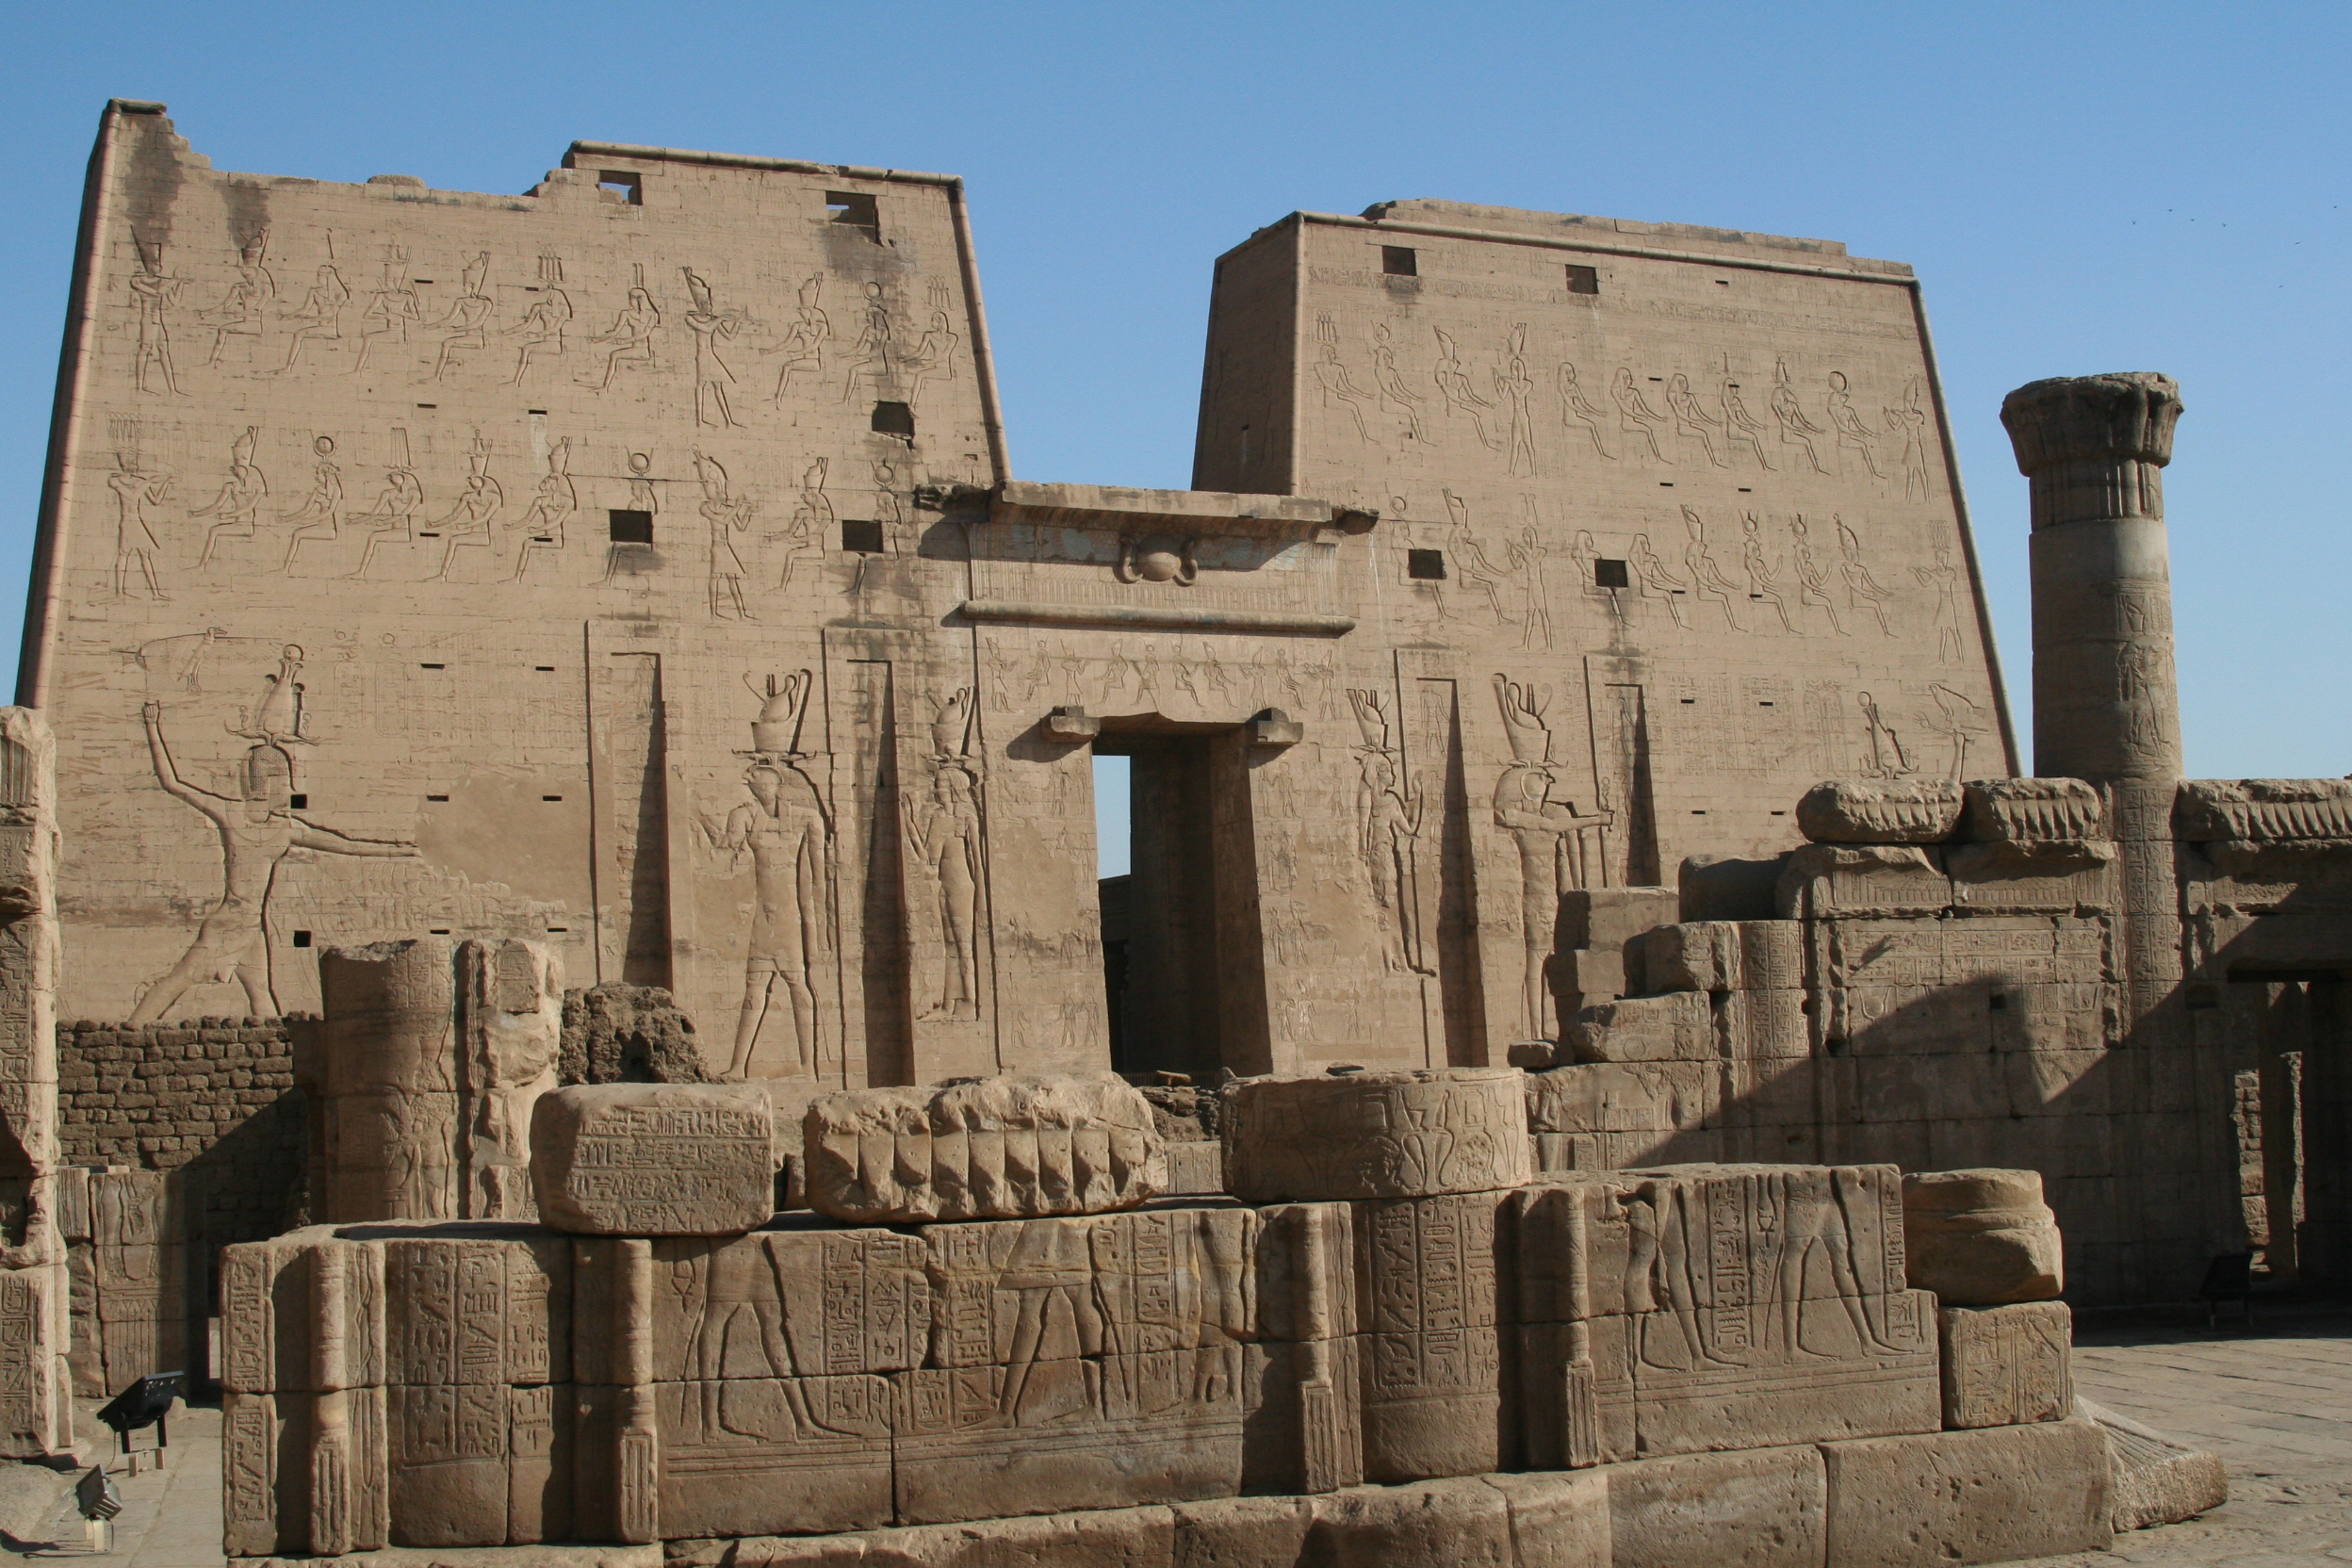 Approach and first pylon of Temple of Horus, Edfu, 2006.